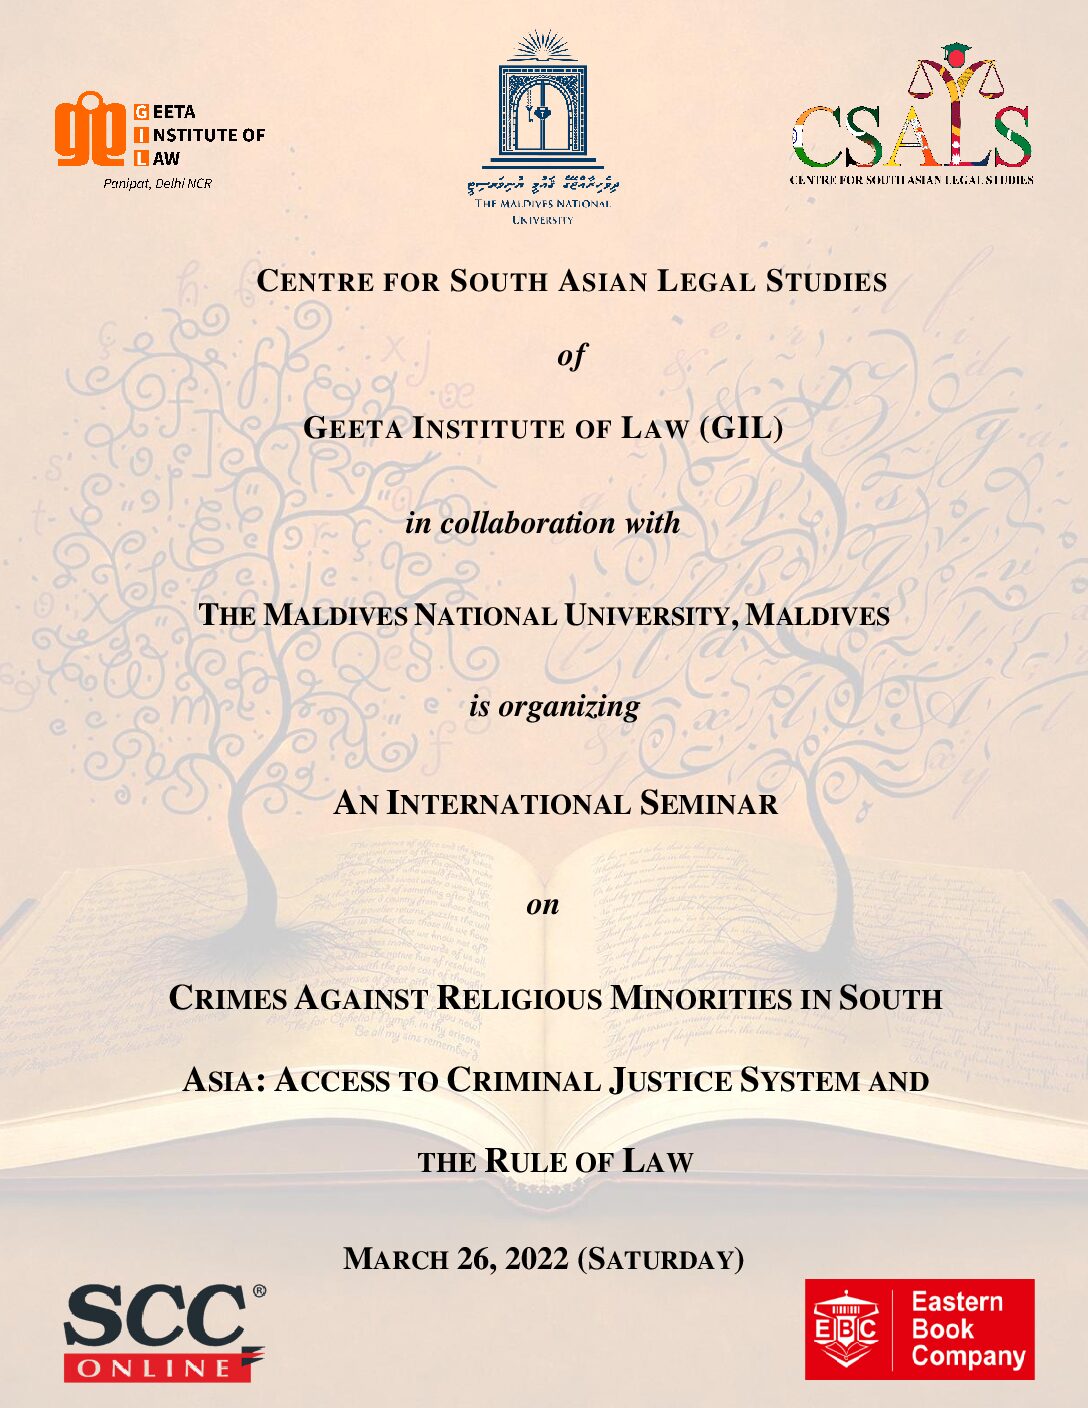 Opportunity for law students: International Seminar (Hybrid Mode) by Geeta Institute of Law and MALDIVES NATIONAL UNIVERSITY on “CRIMES AGAINST RELIGIOUS MINORITIES IN SOUTH ASIA” (Abstract by 25th January 2022)- MARCH 26, 2022 (SATURDAY)